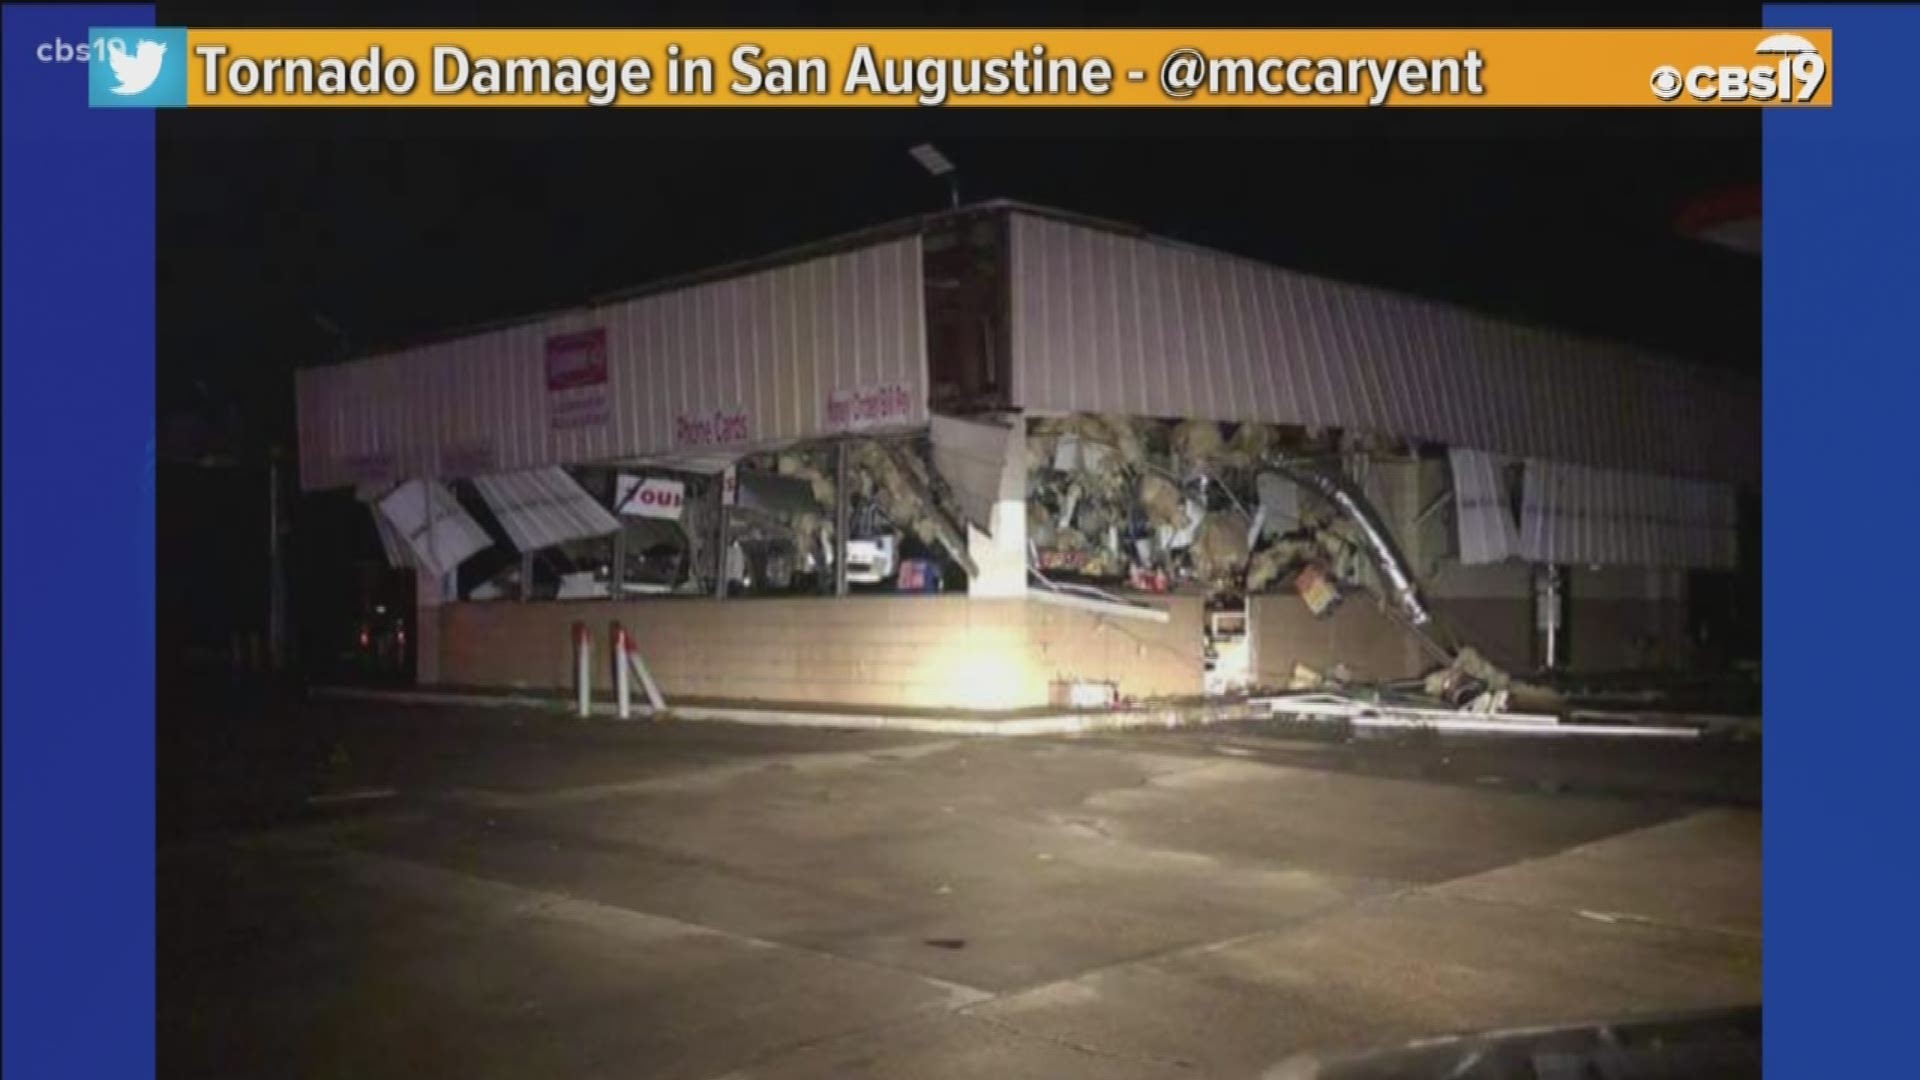 Storm damage reports are coming into the CBS19 Newsroom after severe storms hammered down on East Texas Wednesday night into Thursday morning.